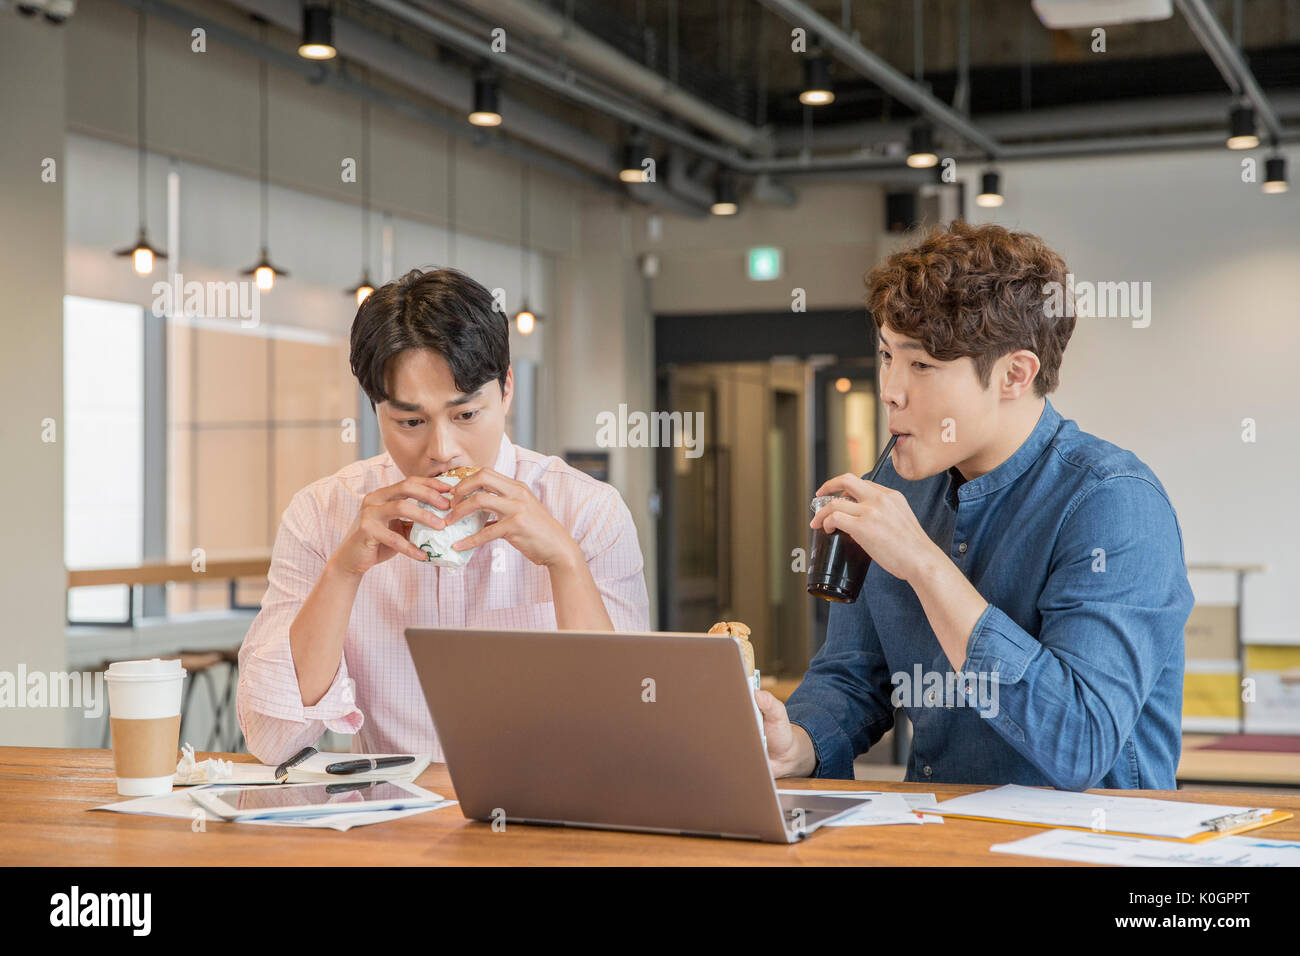 Two businessmen having coffee and sandwiches sharing a notebook computer at cafeteria Stock Photo